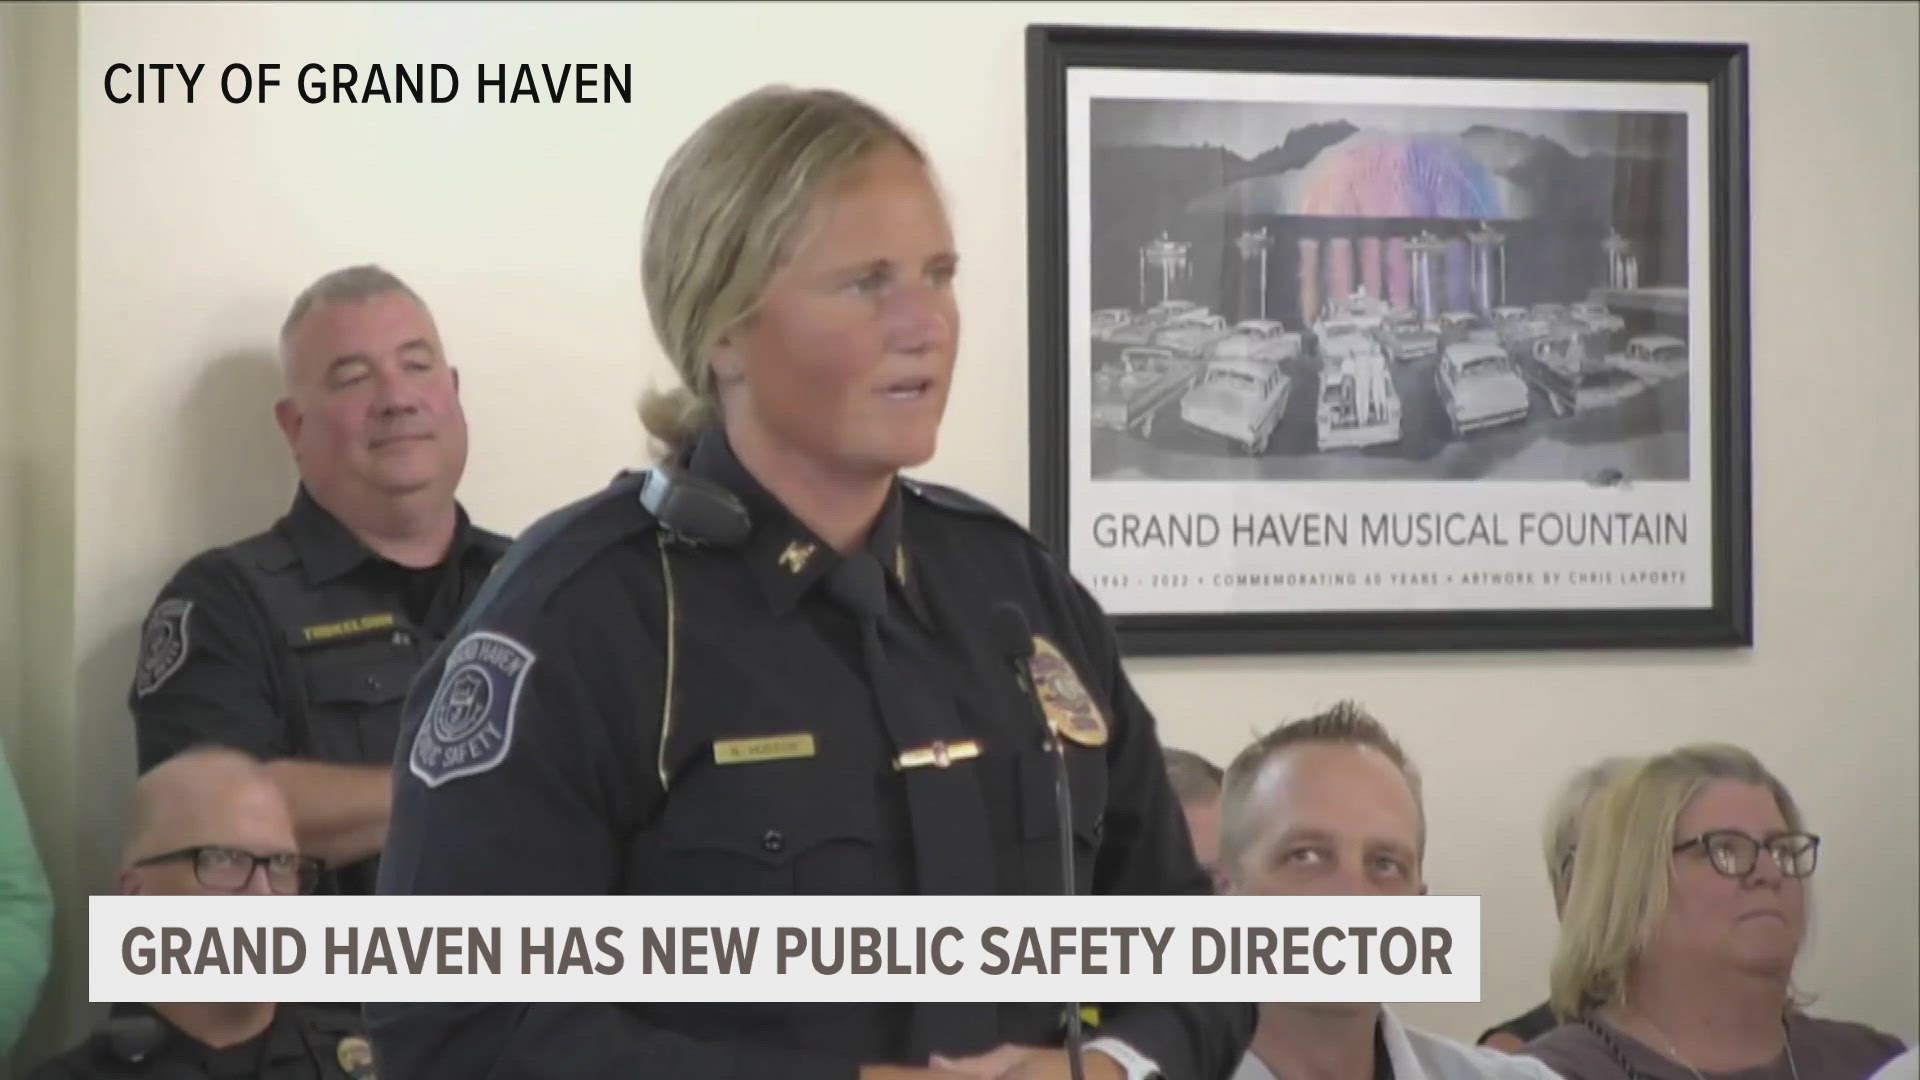 Chief Nichole Hudson was sworn in on Monday night after the Grand Haven City Council unanimously voted to approve her as the new public safety director.